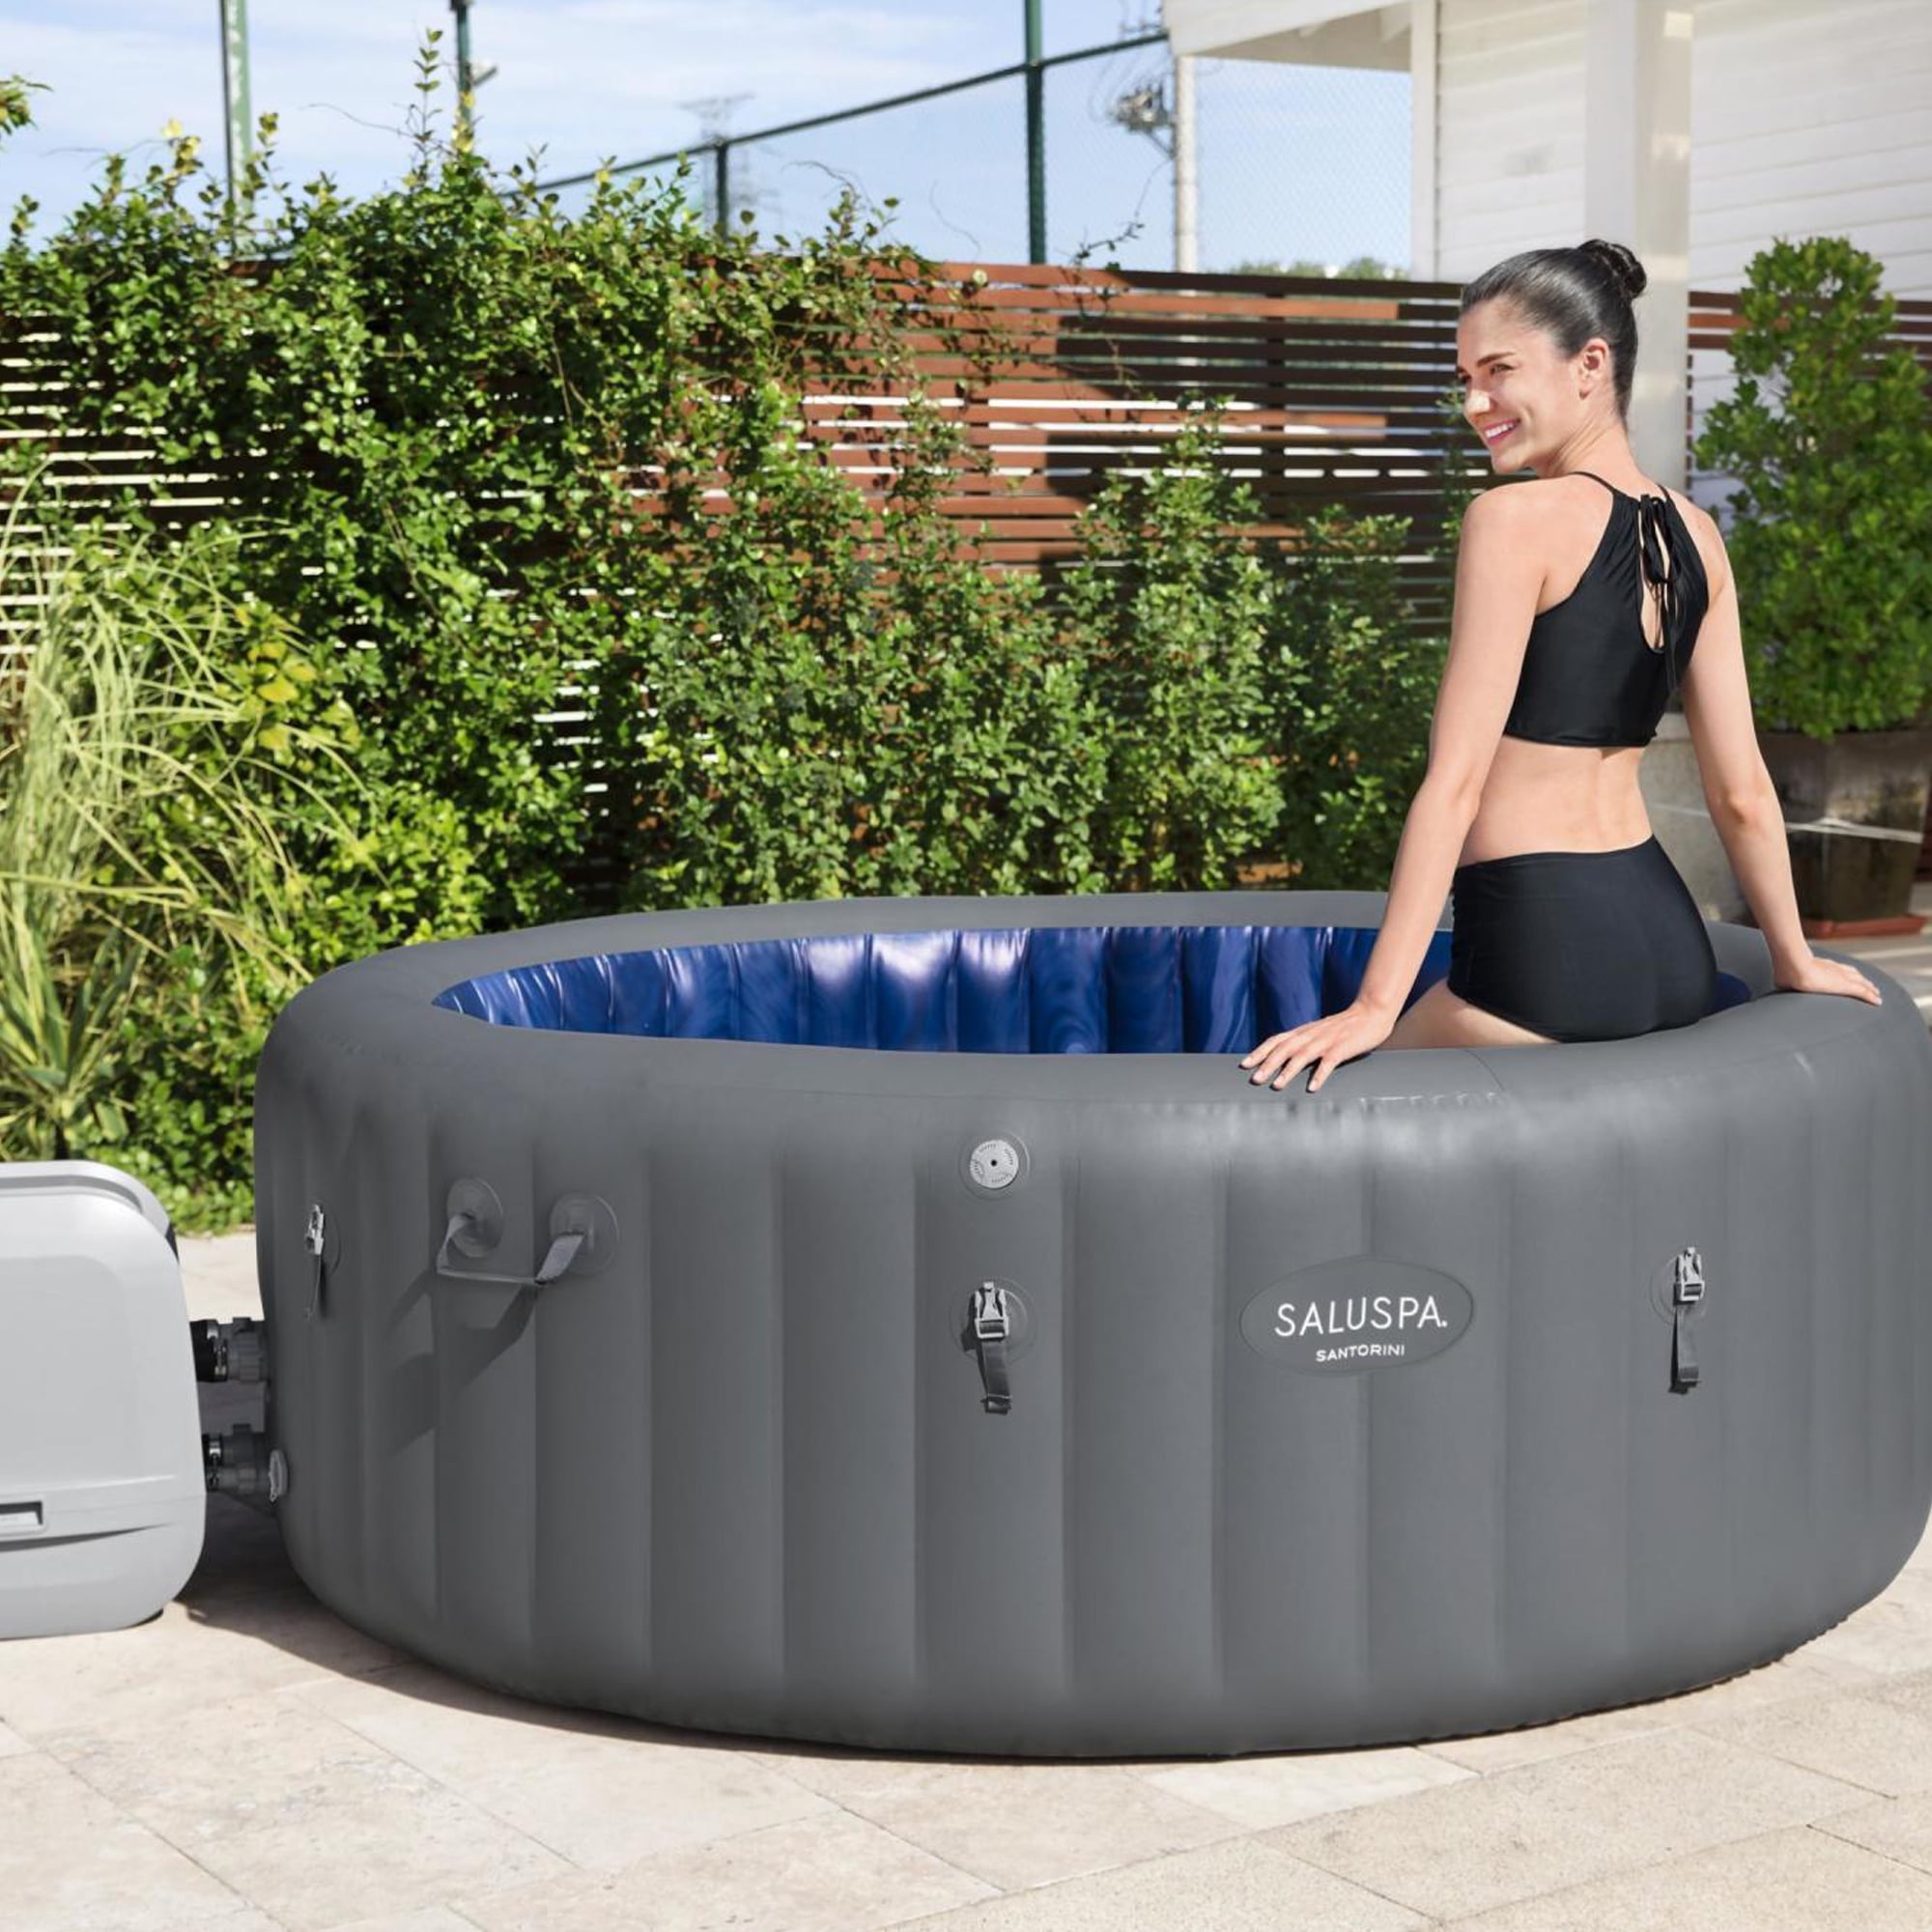 Jets, SaluSpa HydroJet Santorini Bestway Inflatable Gray with Tub 180 Hot